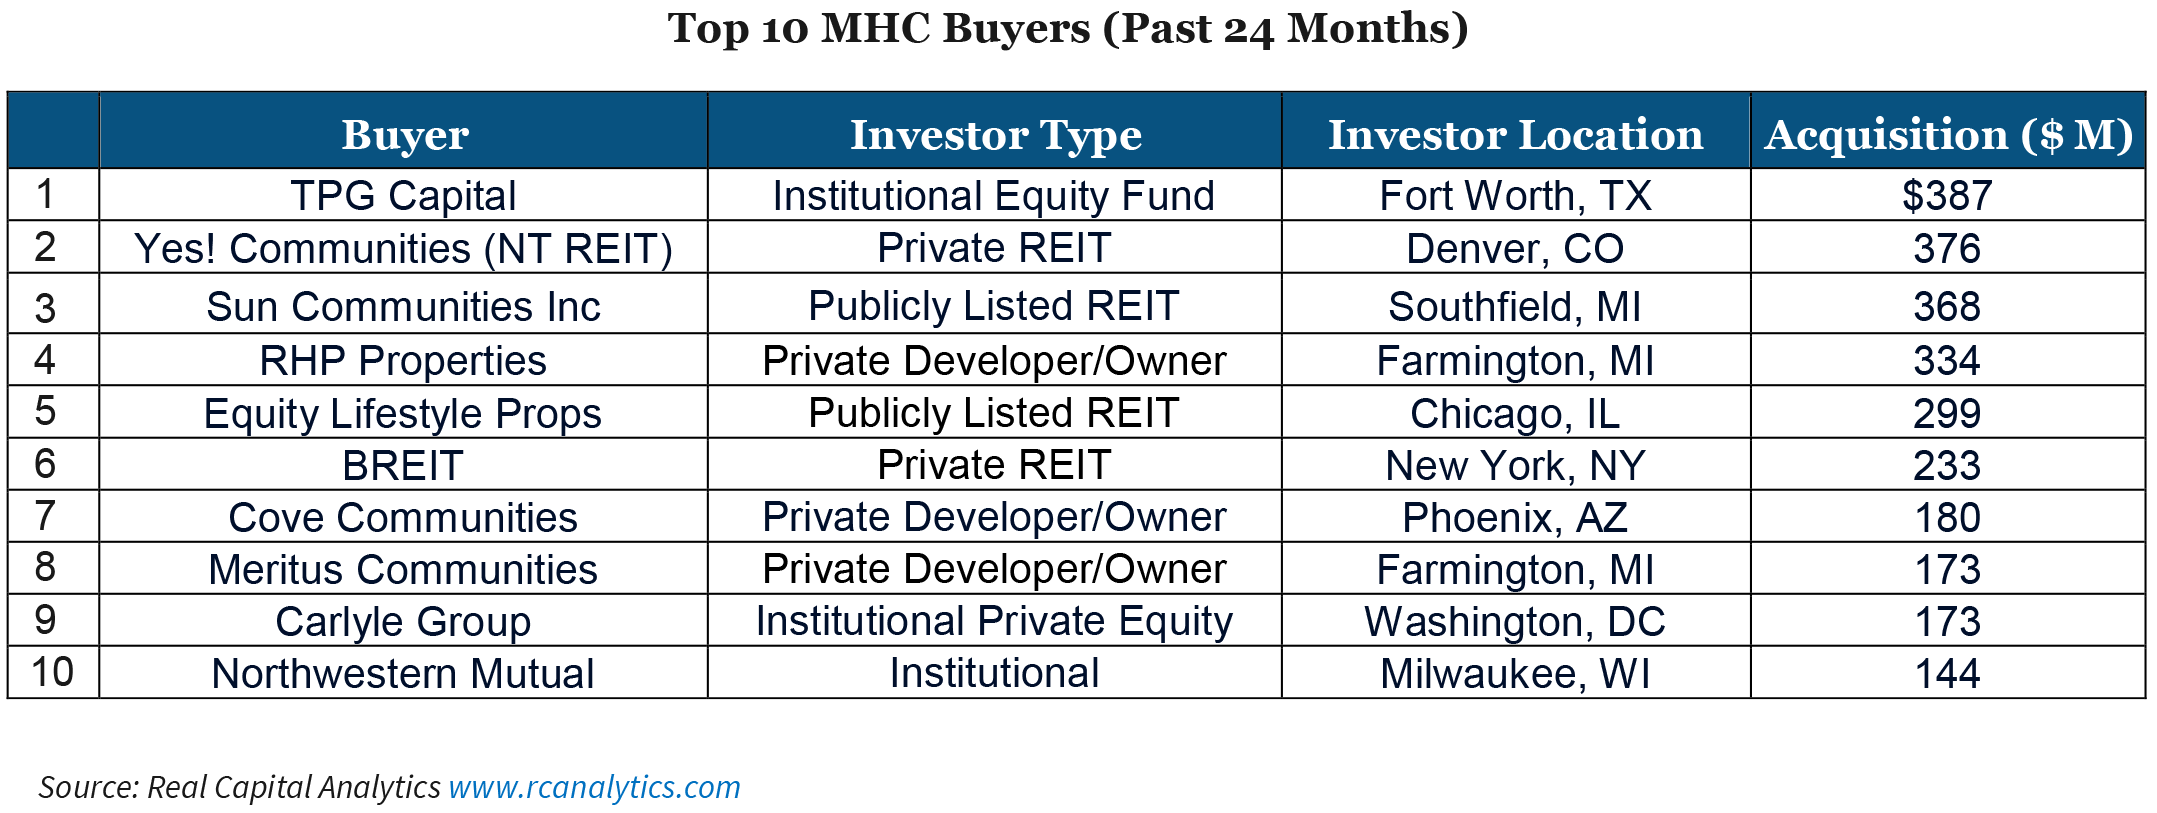 Top 10 MHC Buyers (Past 24 Months)